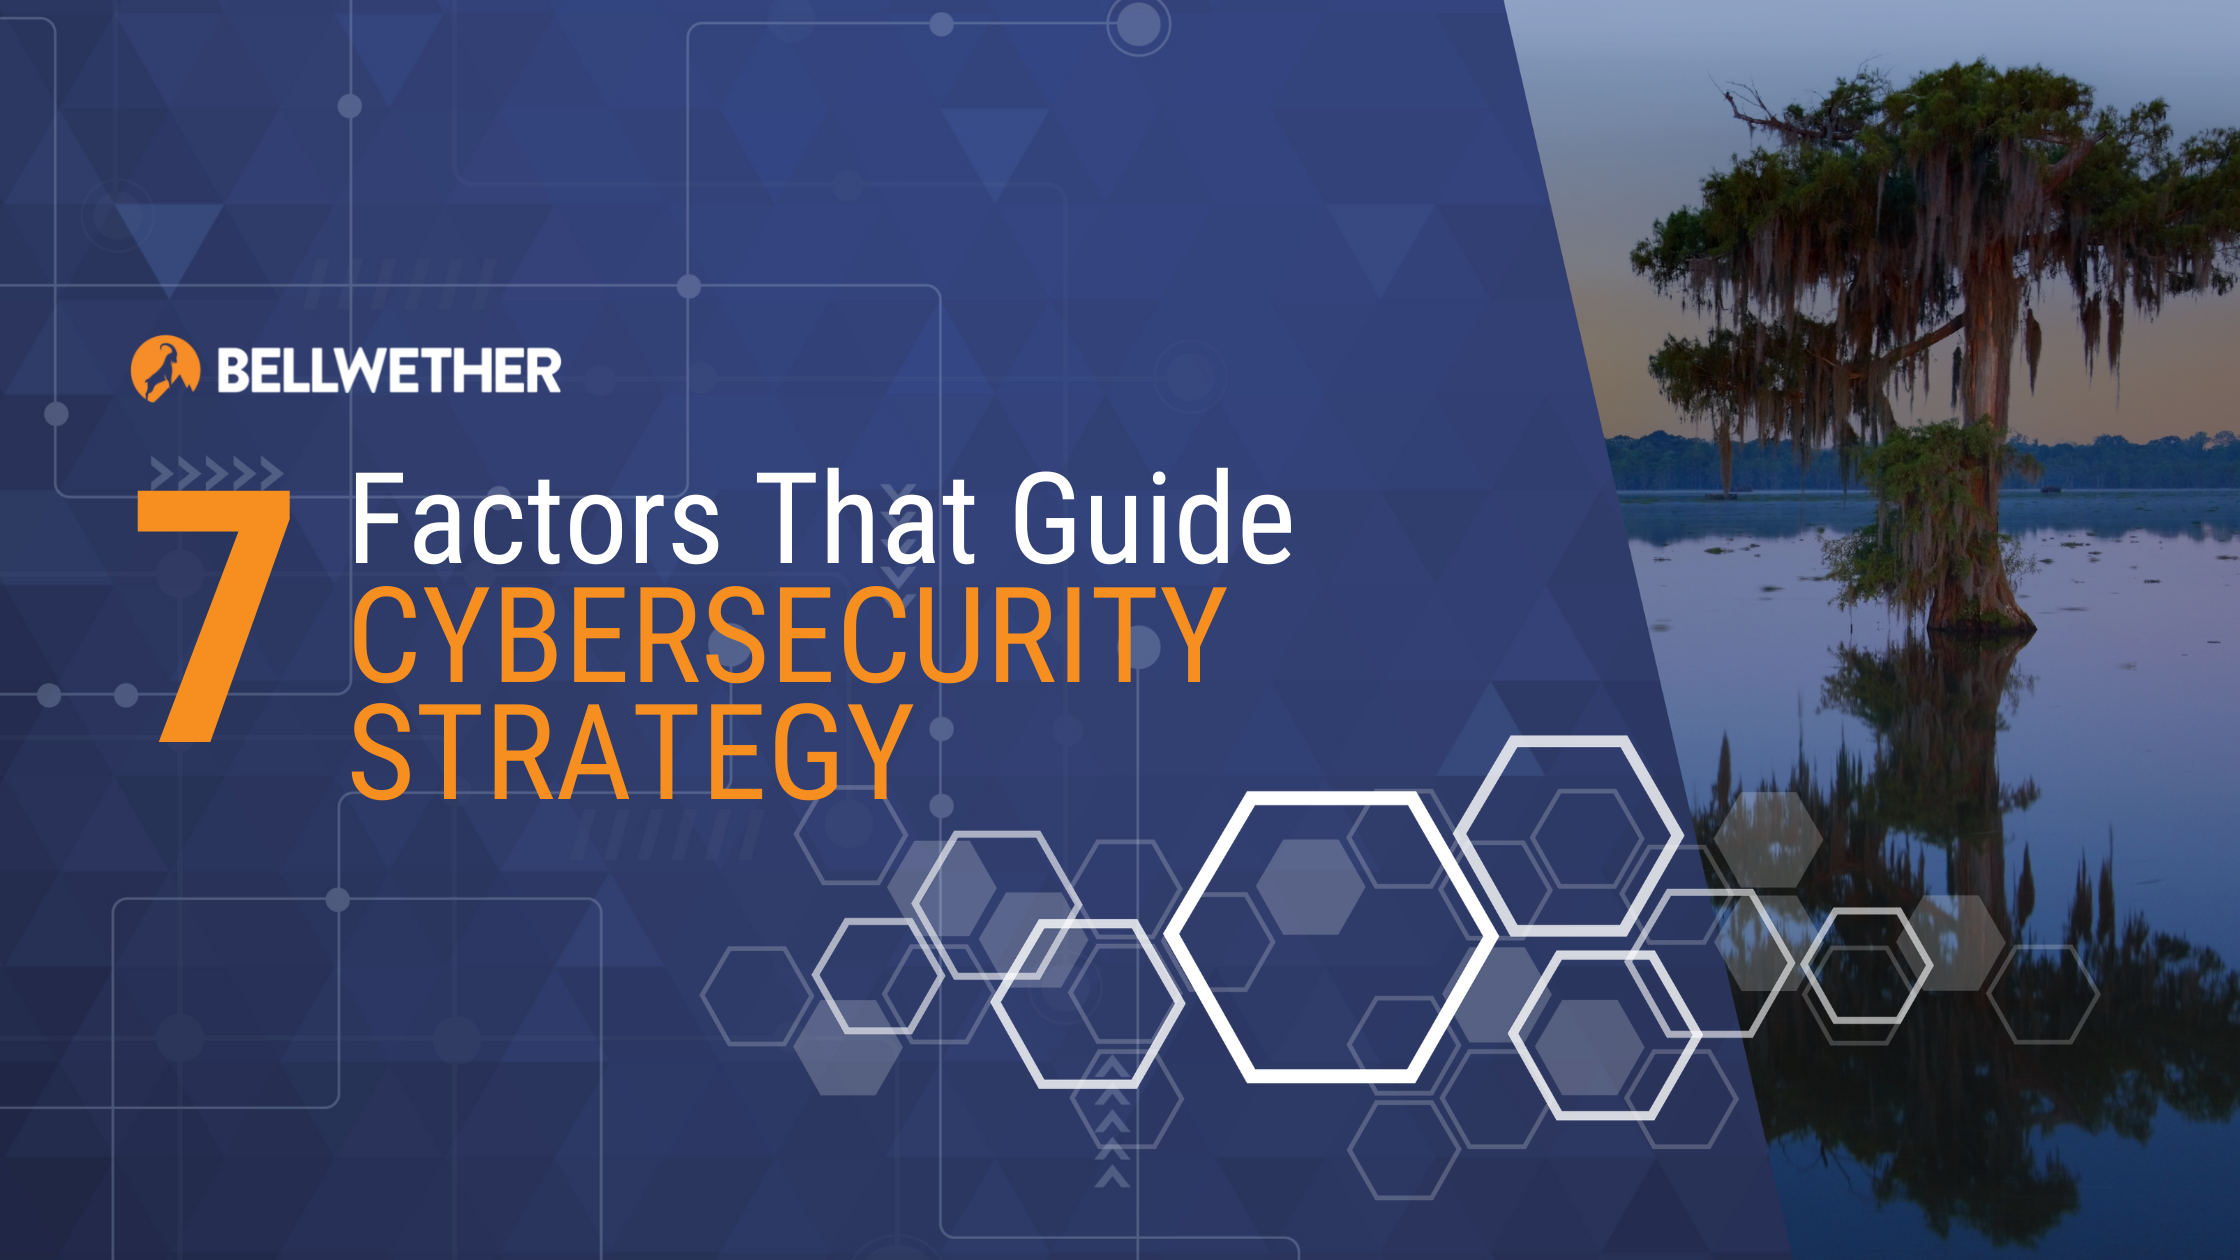 7 Factors That Guide Cybersecurity Strategy